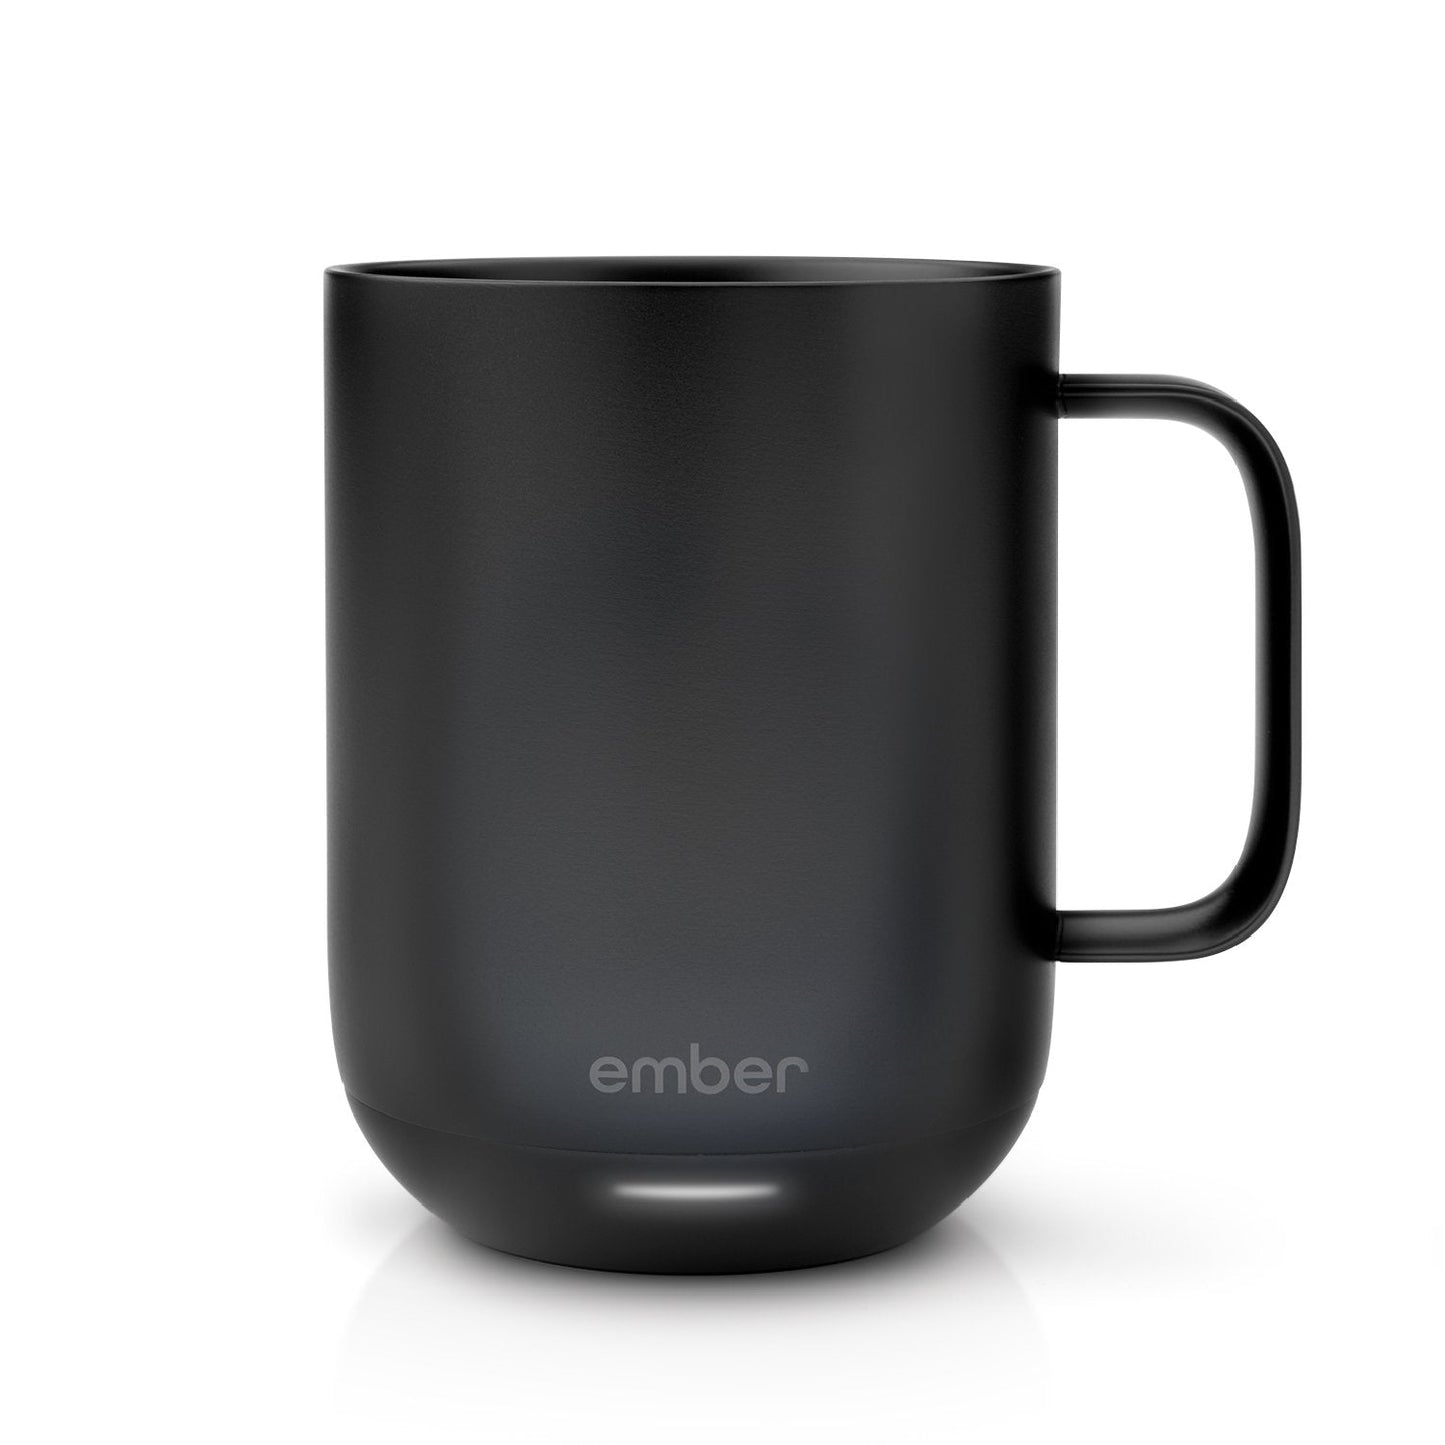  Ember Temperature Control Smart Mug 2, 10 Oz, App-Controlled  Heated Coffee Mug with 80 Min Battery Life and Improved Design, Stainless  Steel : Home & Kitchen